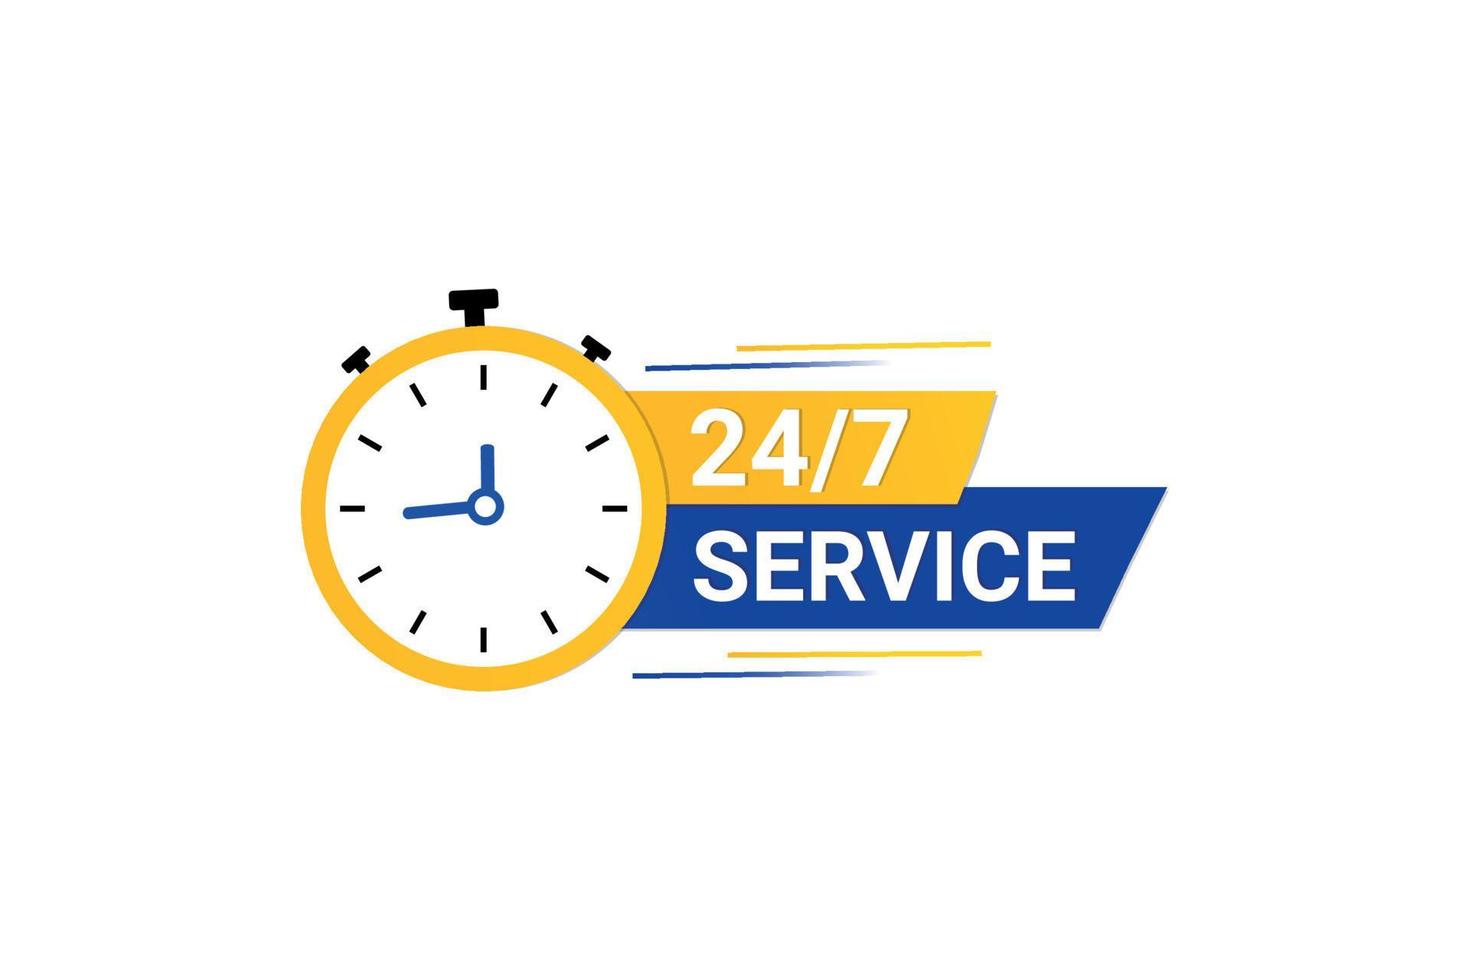 24 7 hour service with clock design. vector